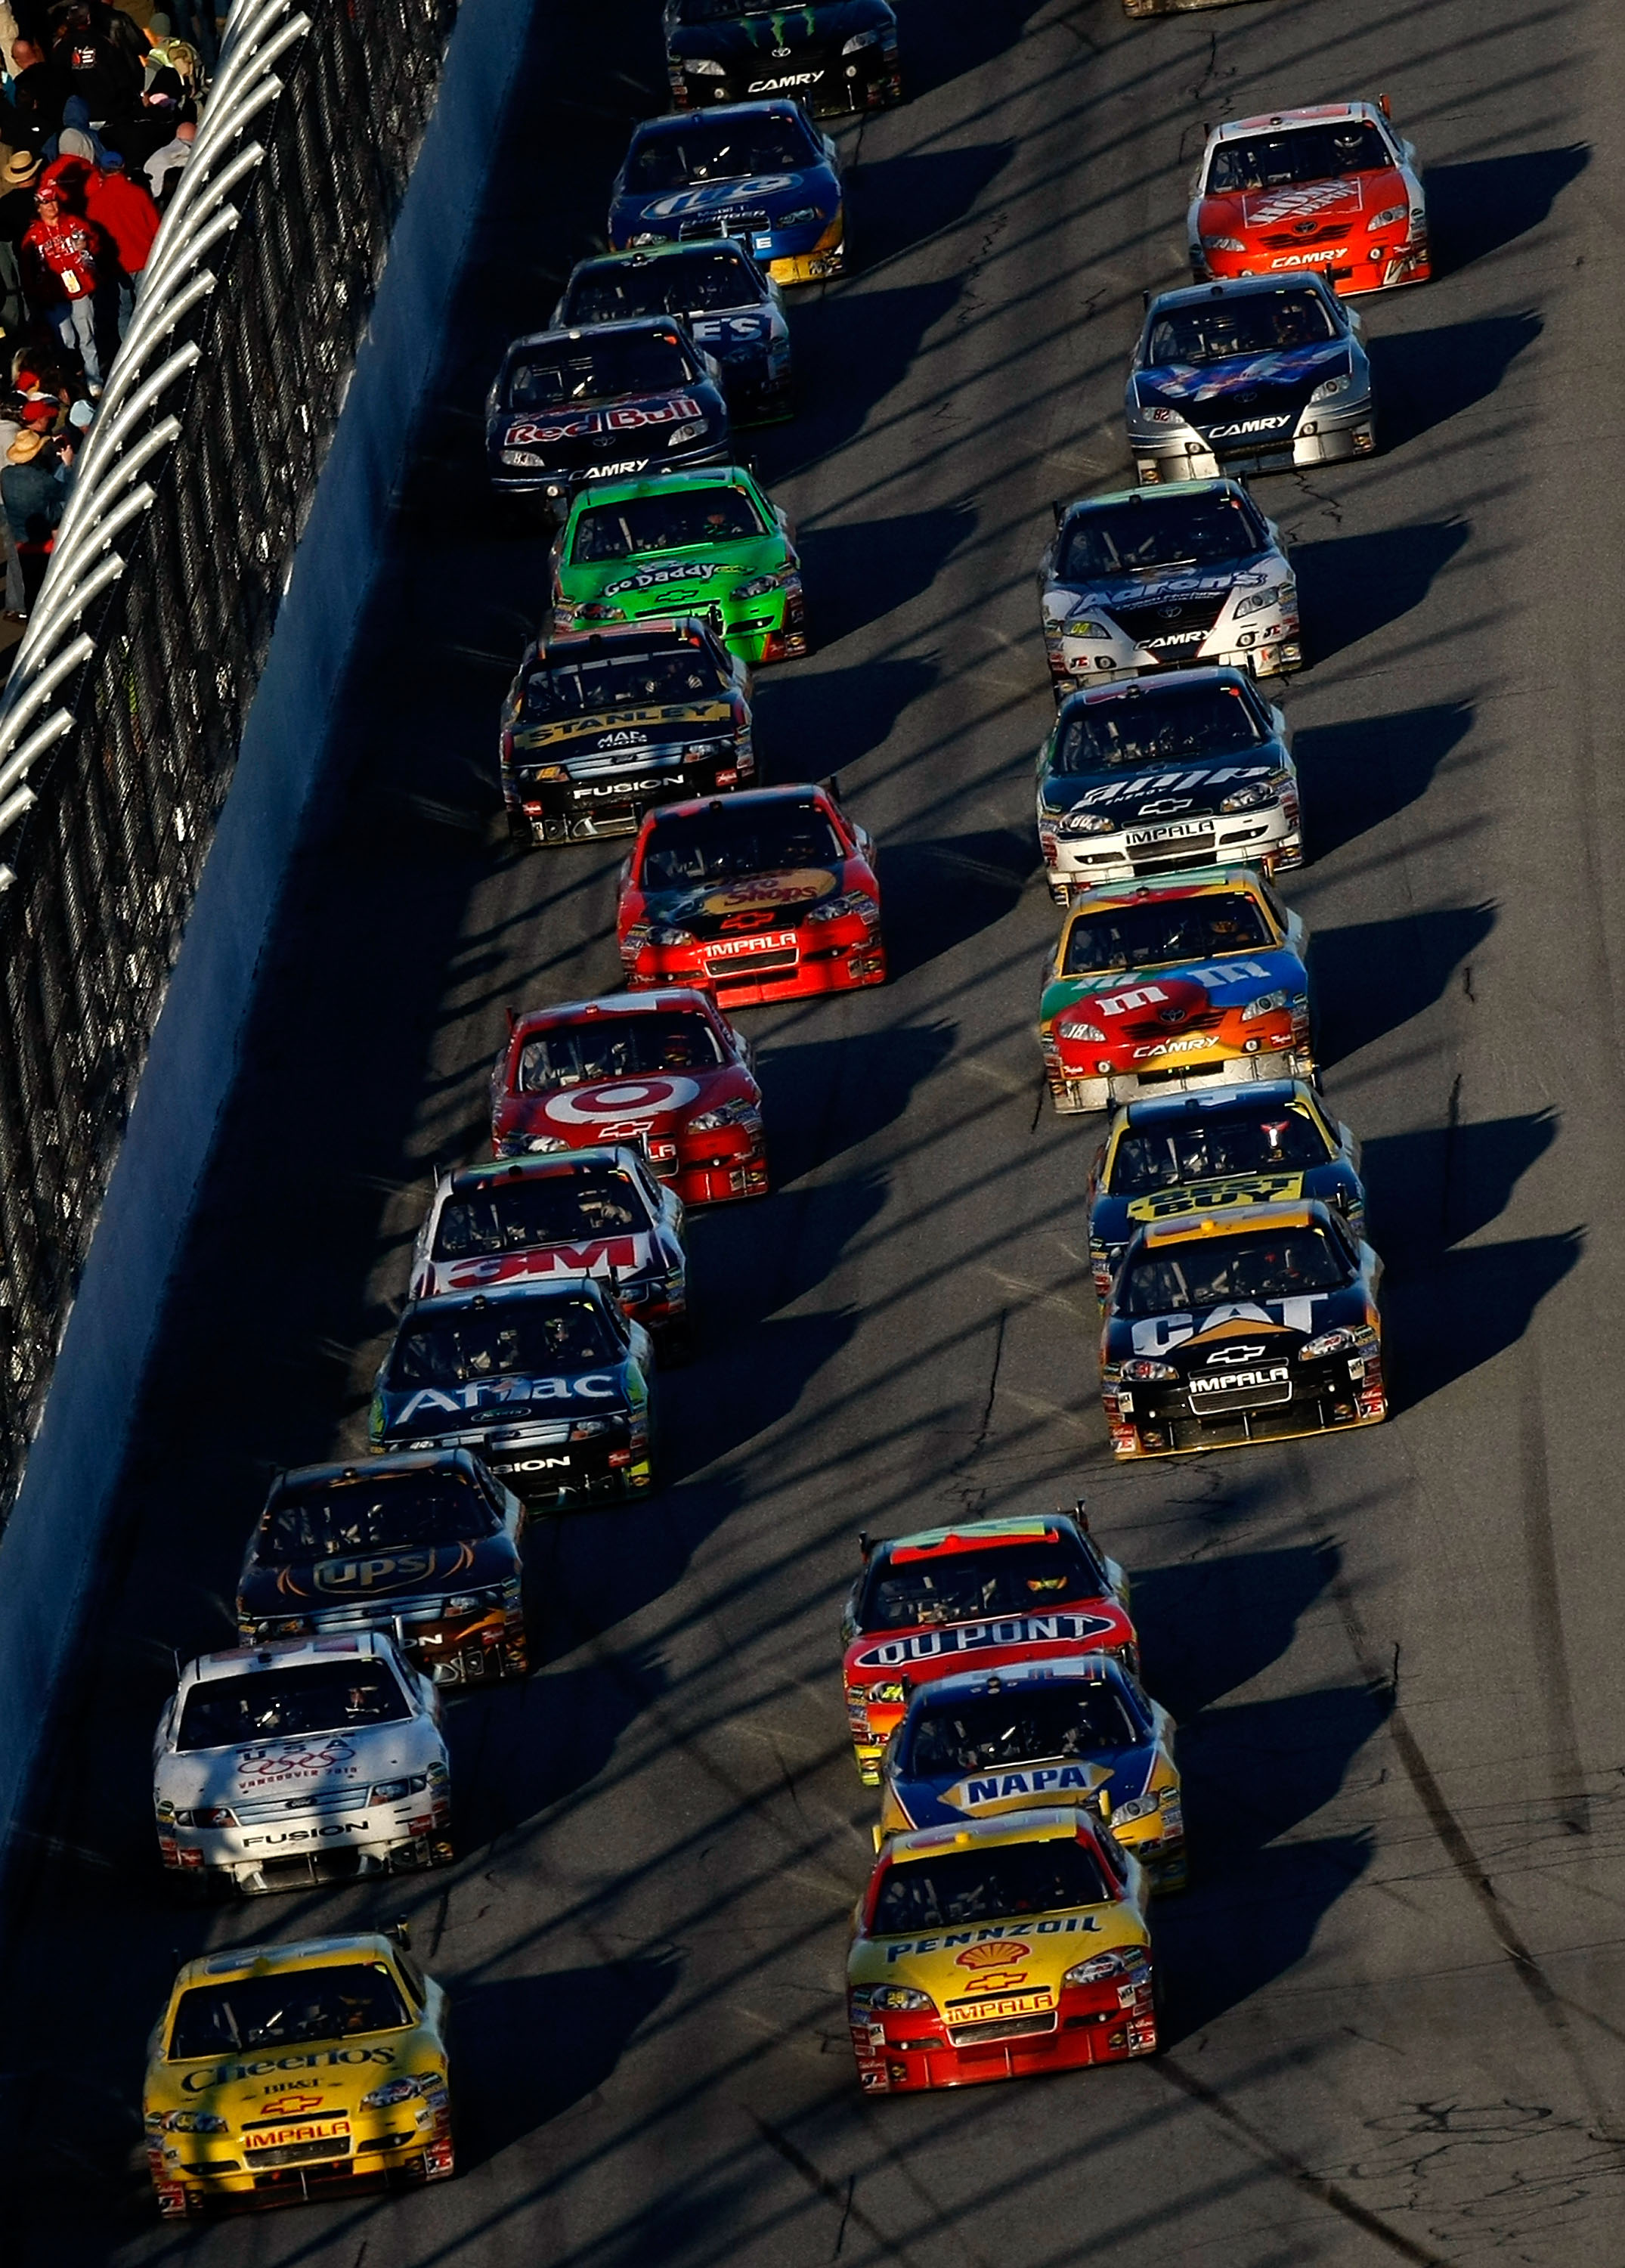 NASCAR Sprint Cup The 10 Biggest Technological Innovations of the Last